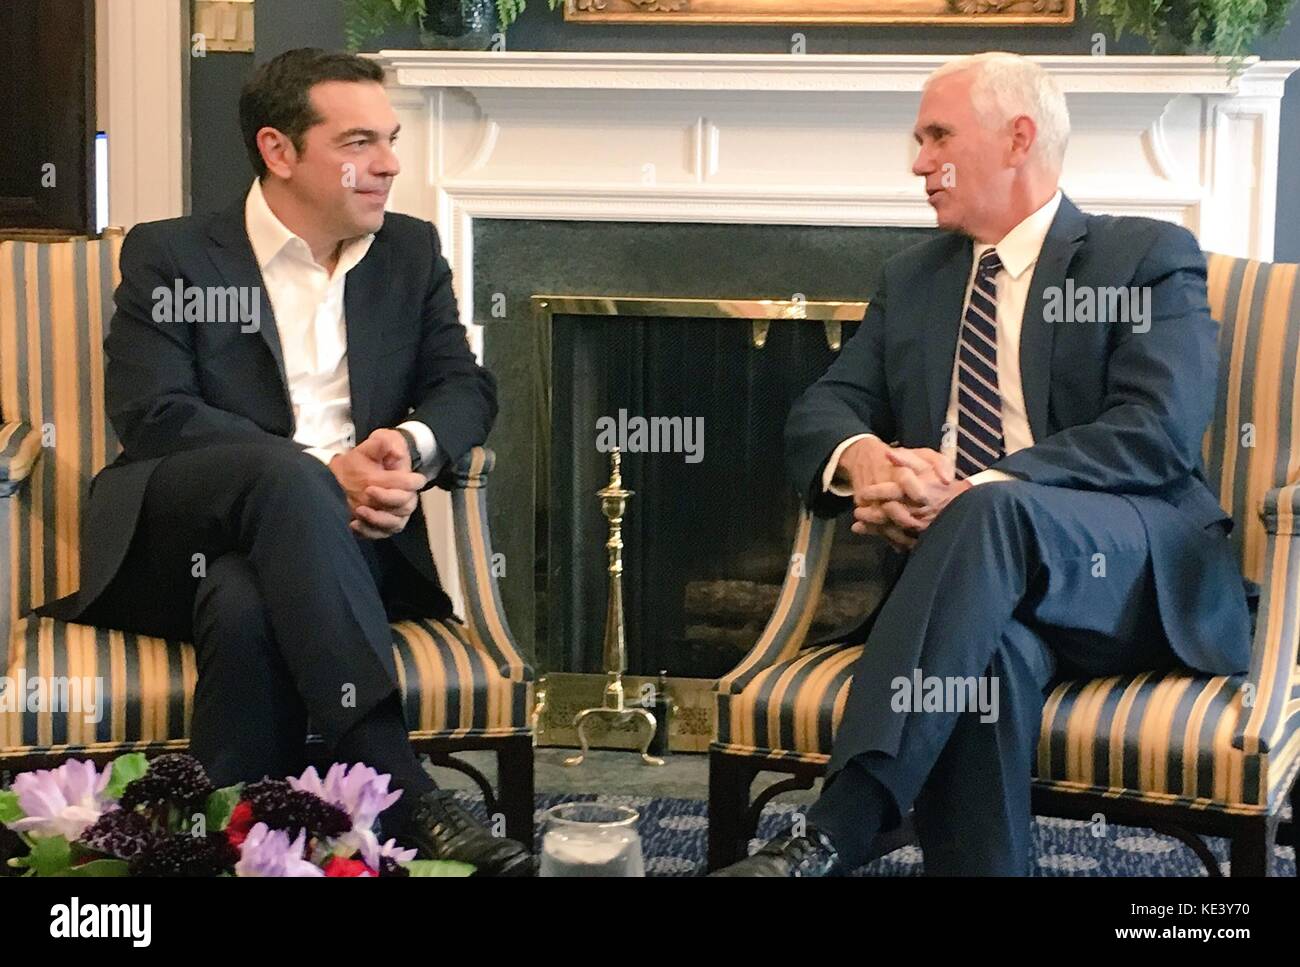 Washington, United States Of America. 18th Oct, 2017. U.S. Vice President Mike Pence, right, during a bilateral meeting with Greek Prime Minister Alexis Tsipras at the White House October 18, 2017 in Washington, DC.  Credit: Planetpix/Alamy Live News Stock Photo